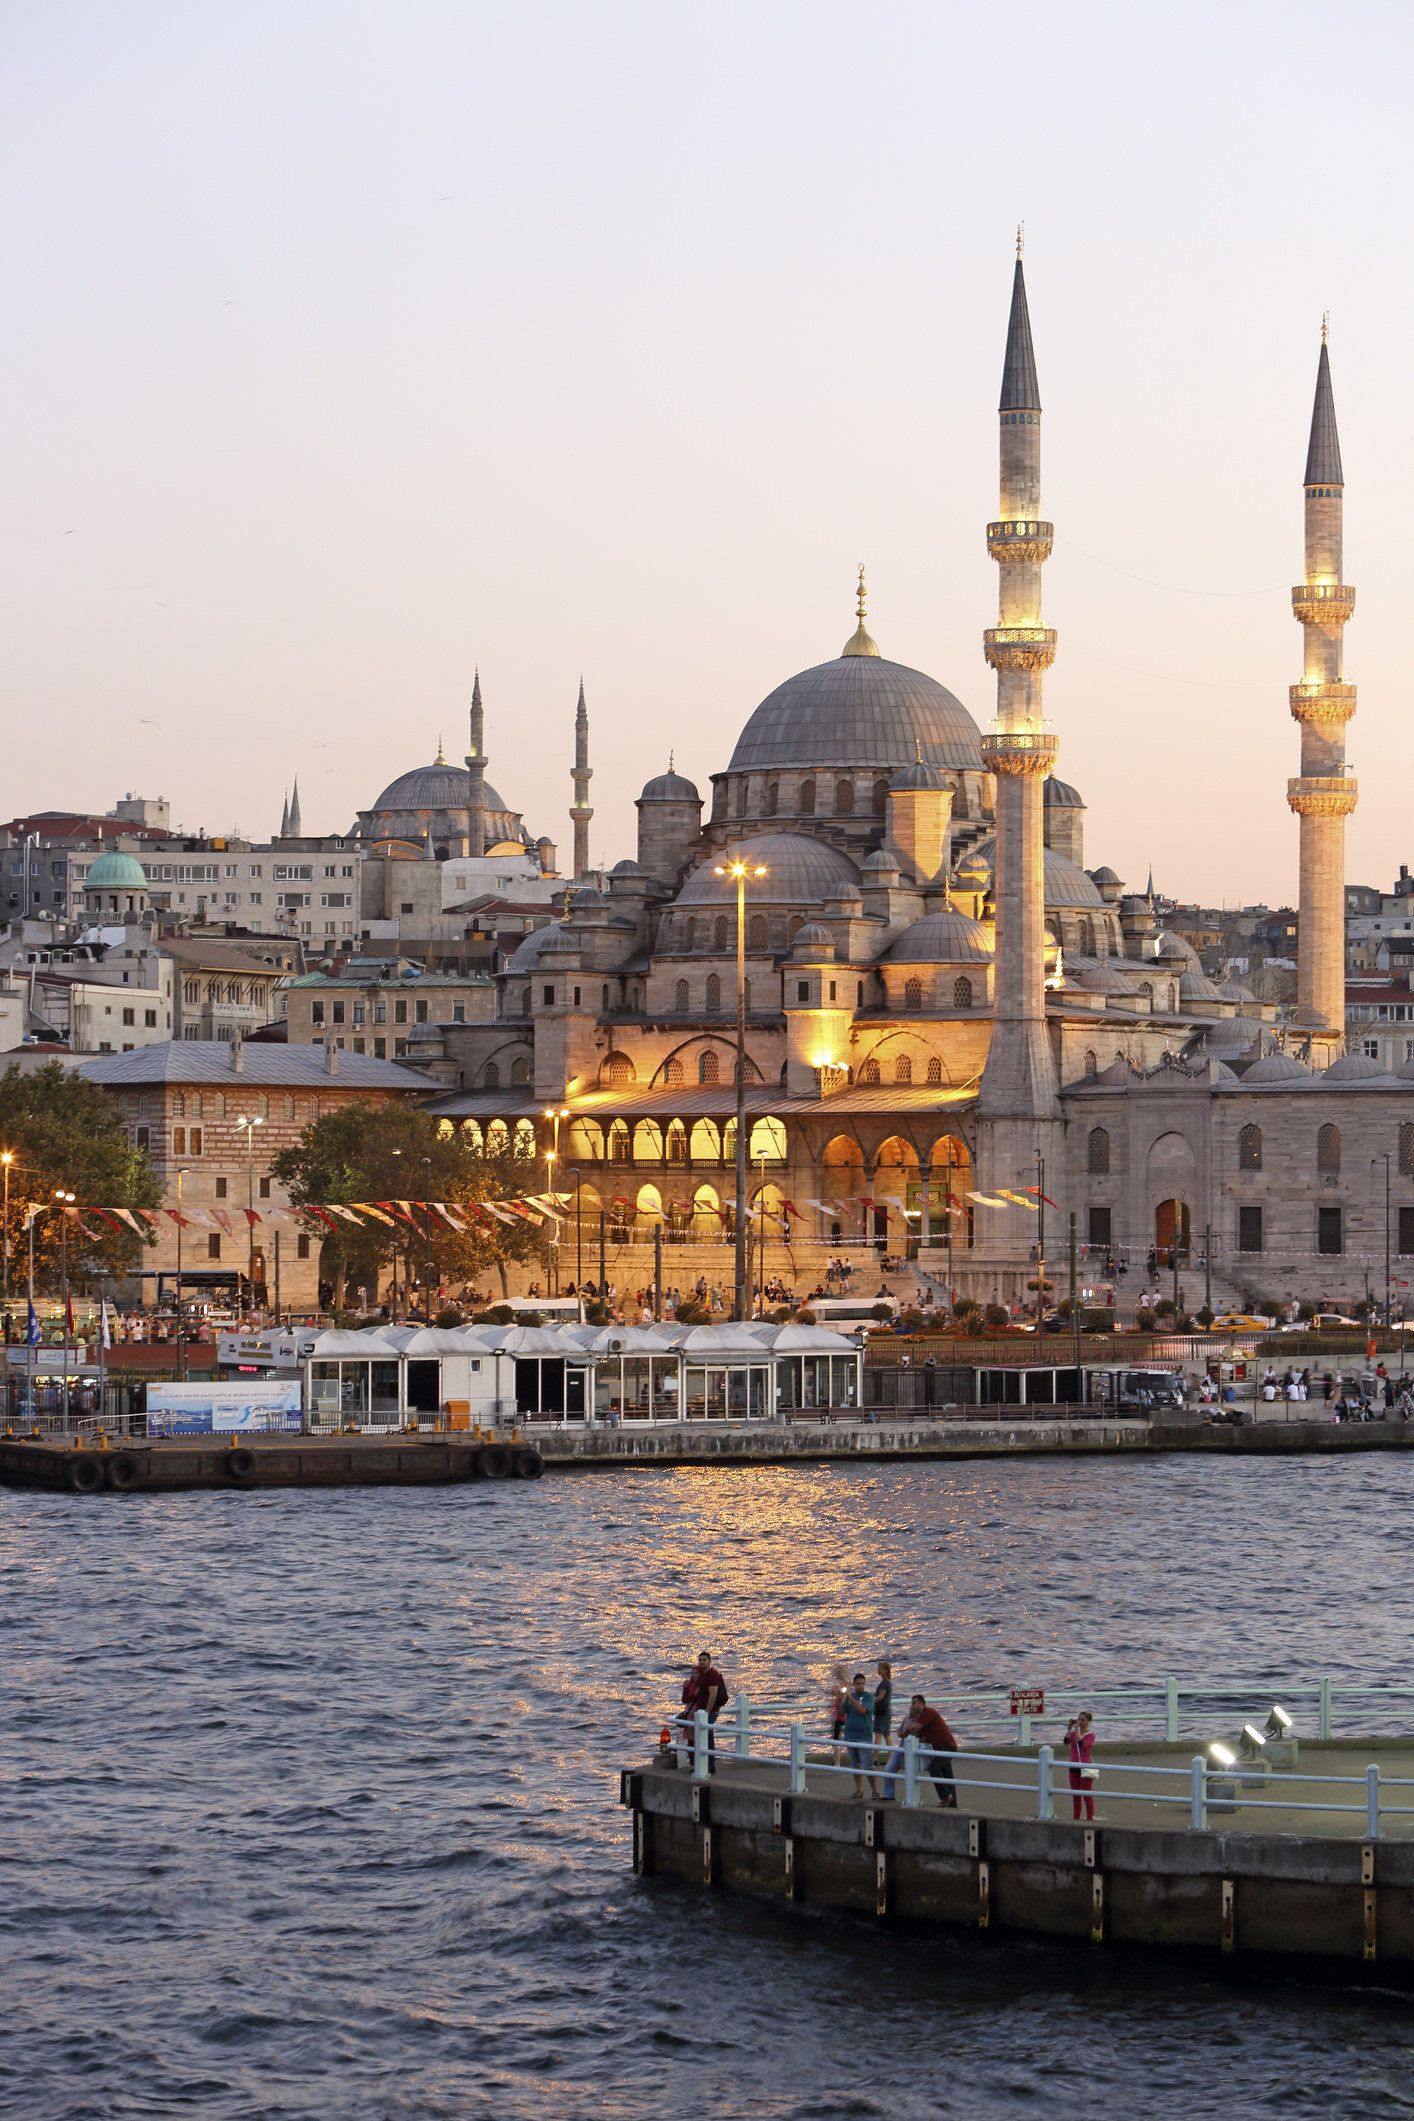 A mosque overlooking the water.